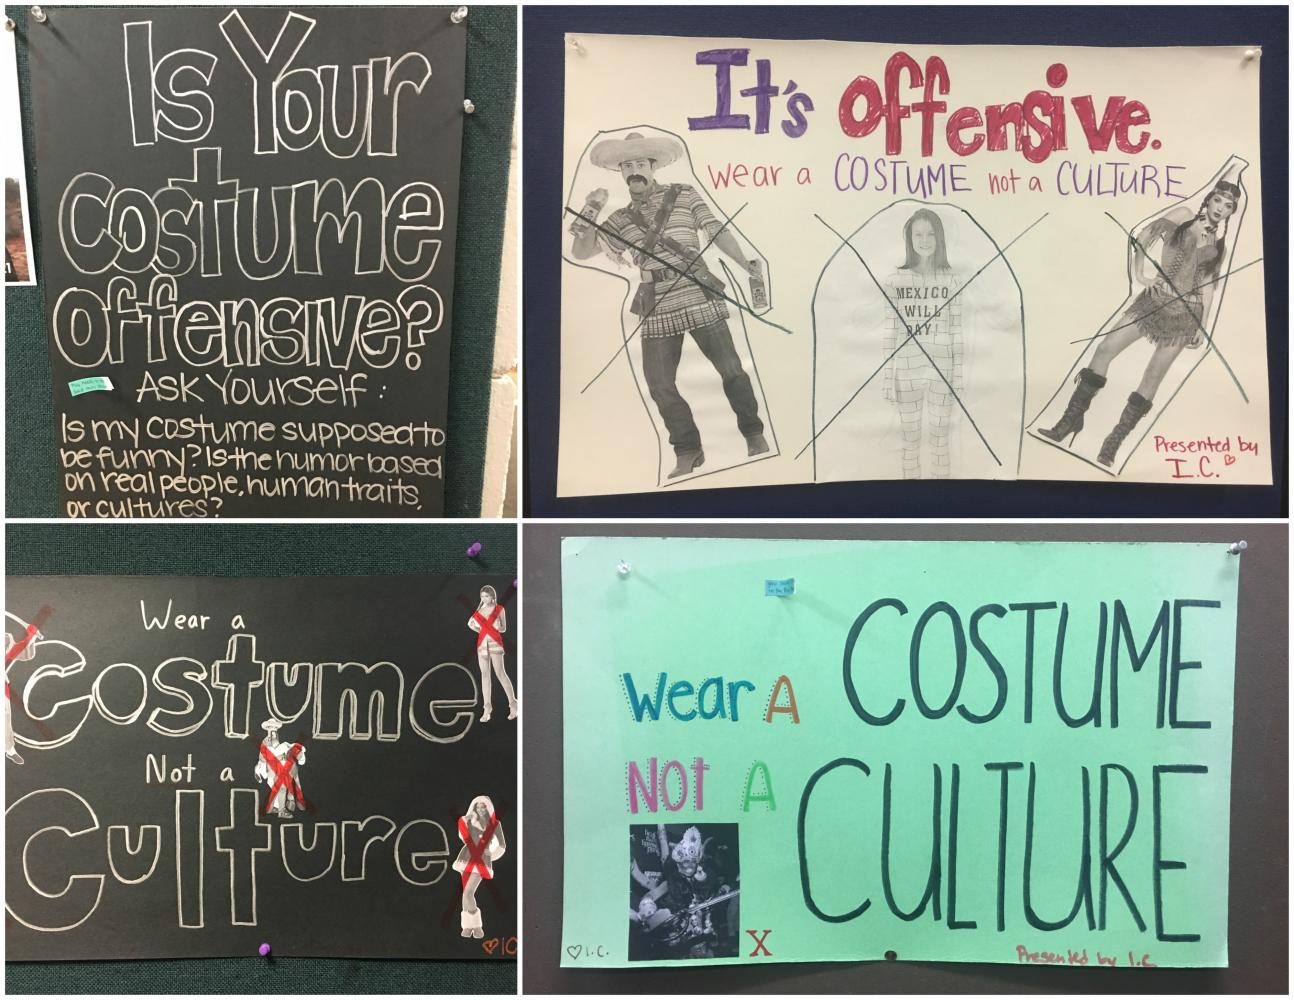 IC posters demote cultural appropriation in Halloween costumes